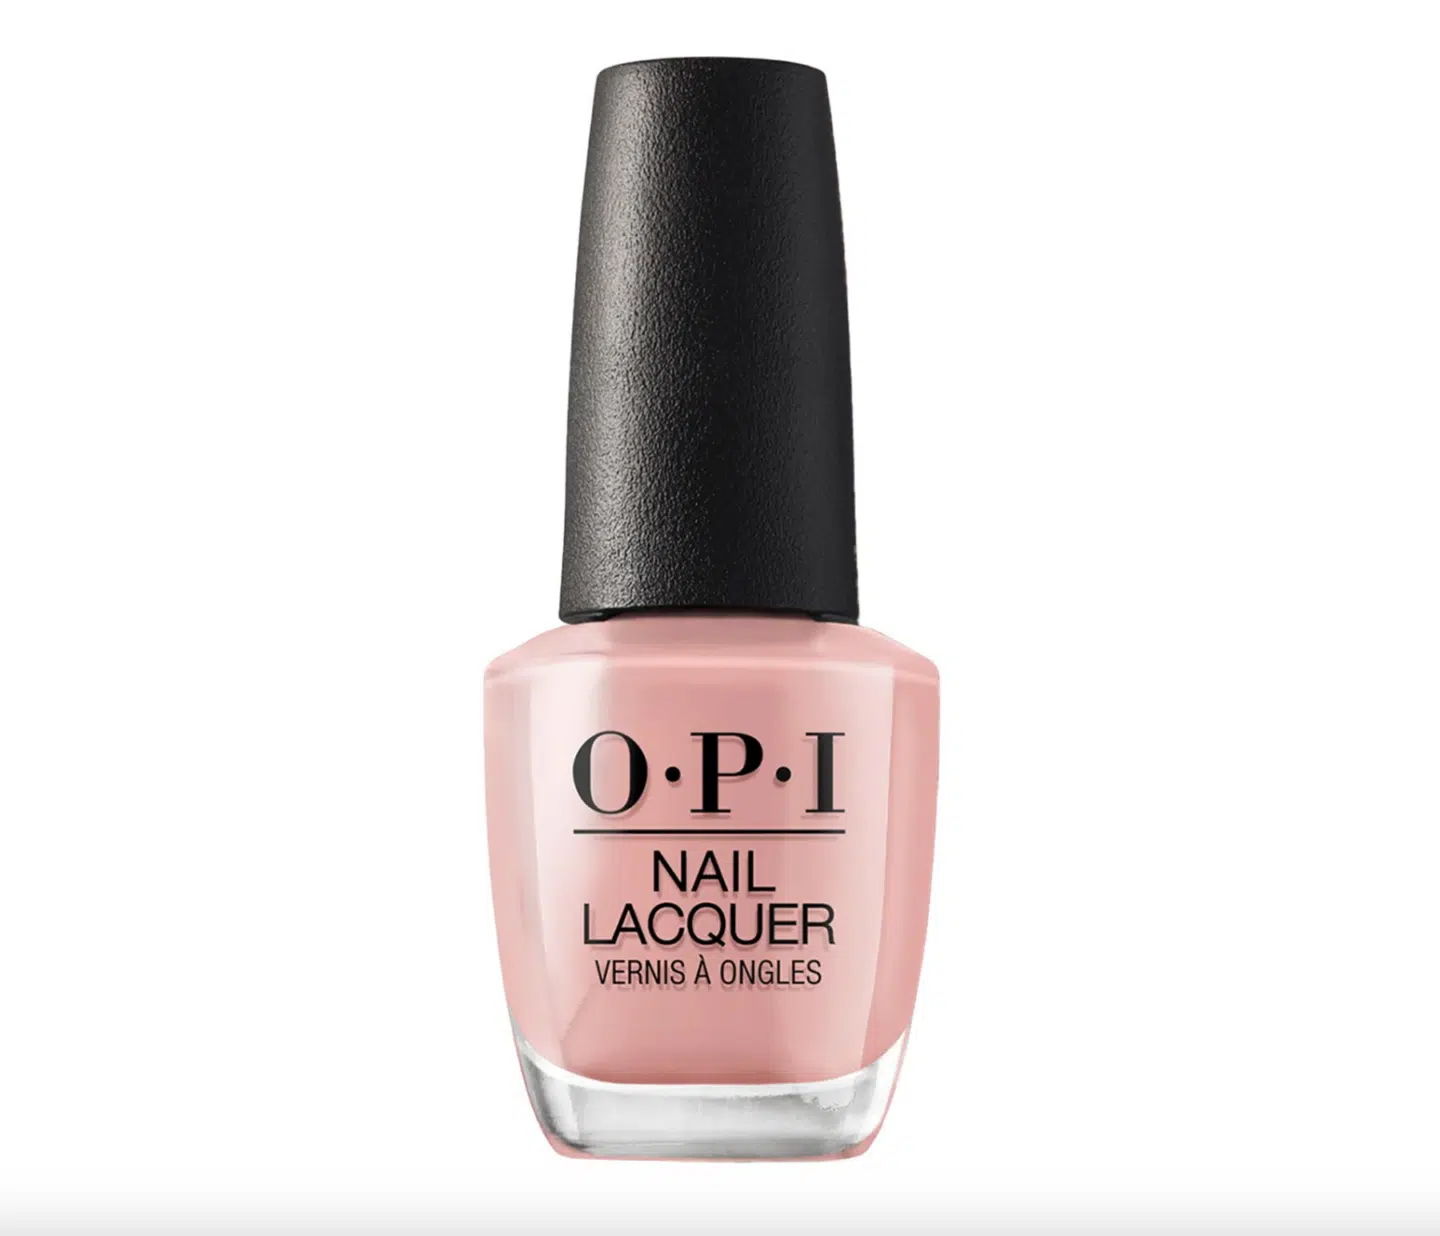 Perfect nude pink nails, by beauty blogger What The Fab